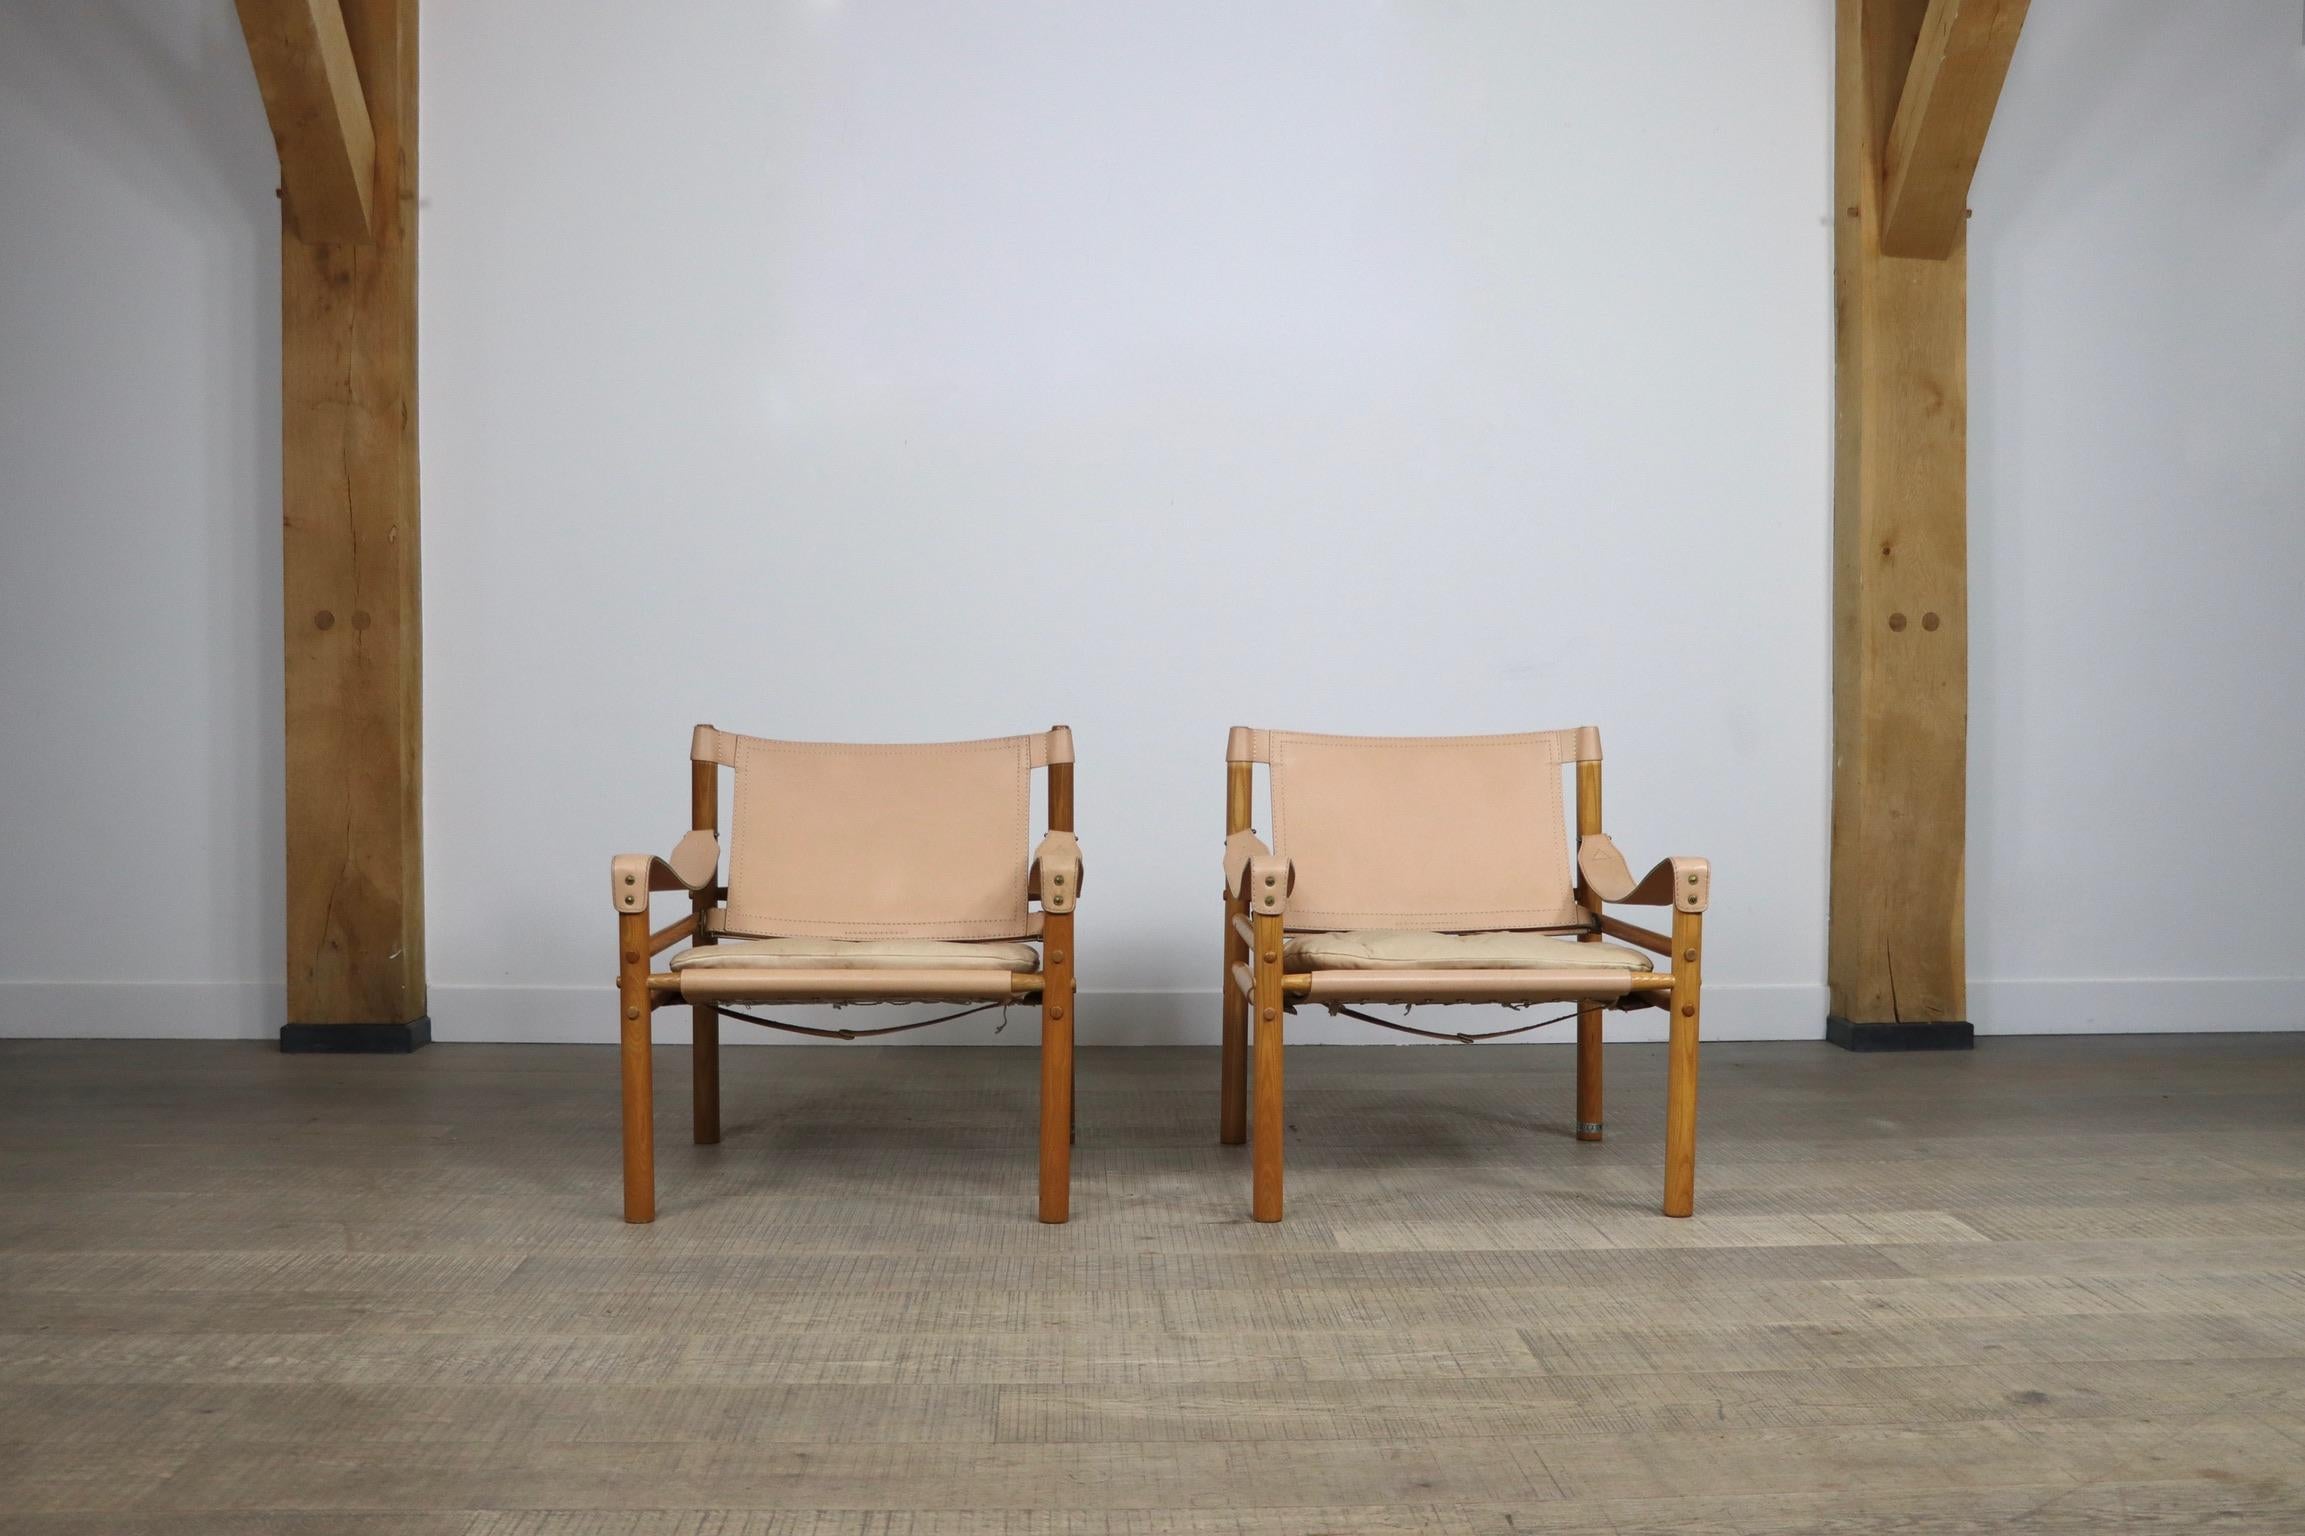 Set of 2 Sirocco easy chairs model Sirocco in light peach leather designed by Arne Norell, Produced by Arne Norell AB in Aneby, Sweden. These chairs are made of an ashwoord frame and original light peach leather seating and armrests with a soft